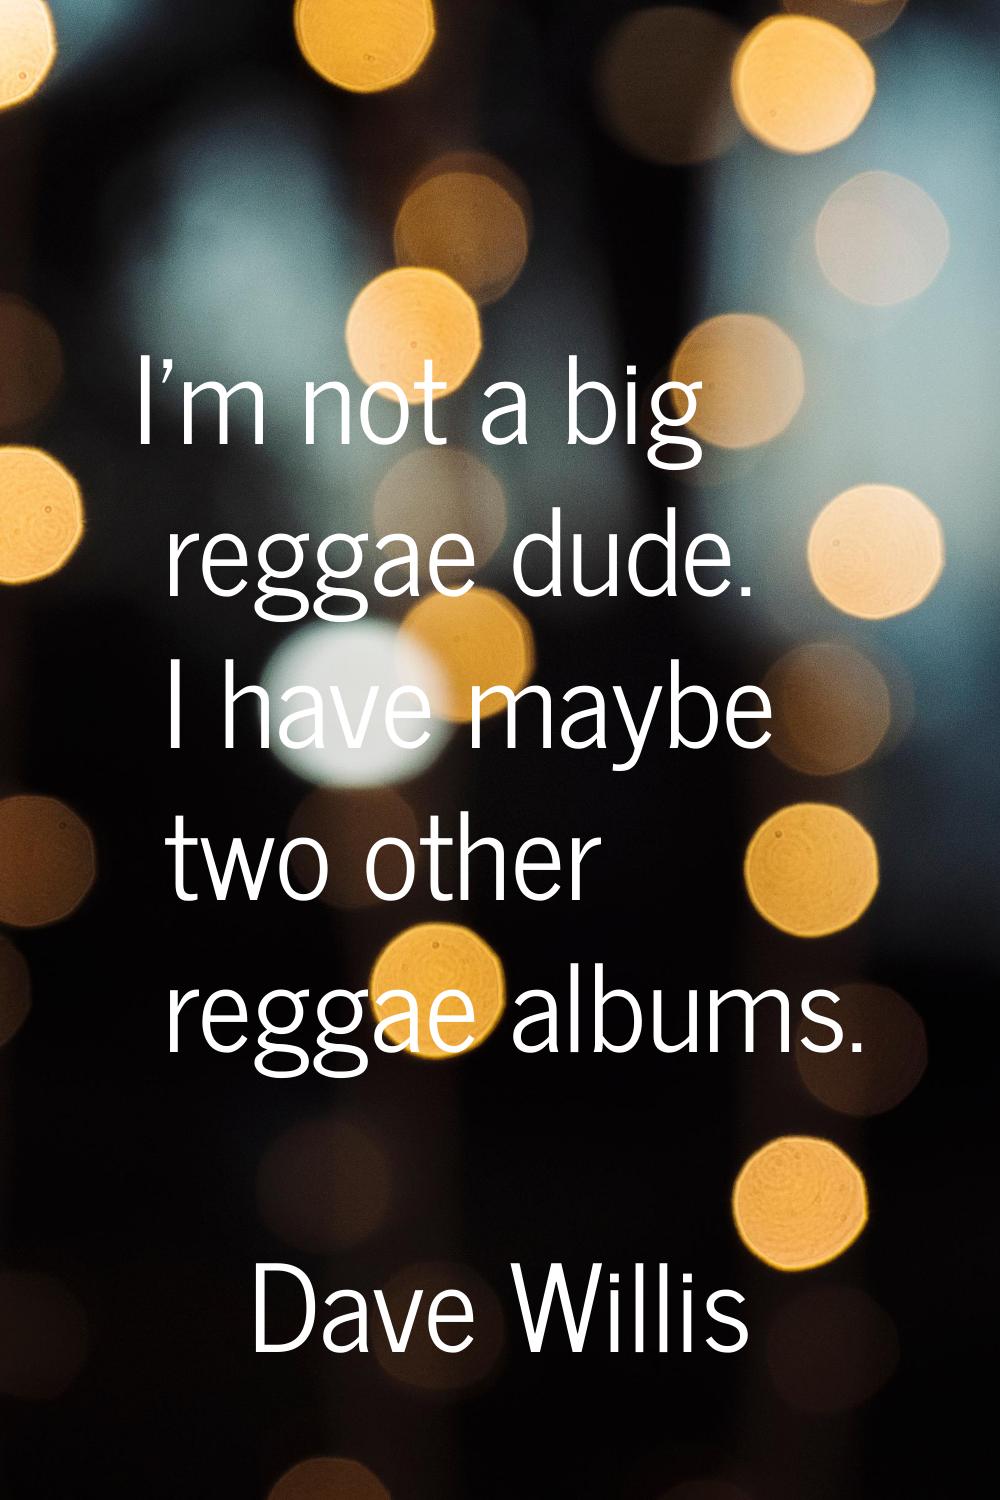 I'm not a big reggae dude. I have maybe two other reggae albums.